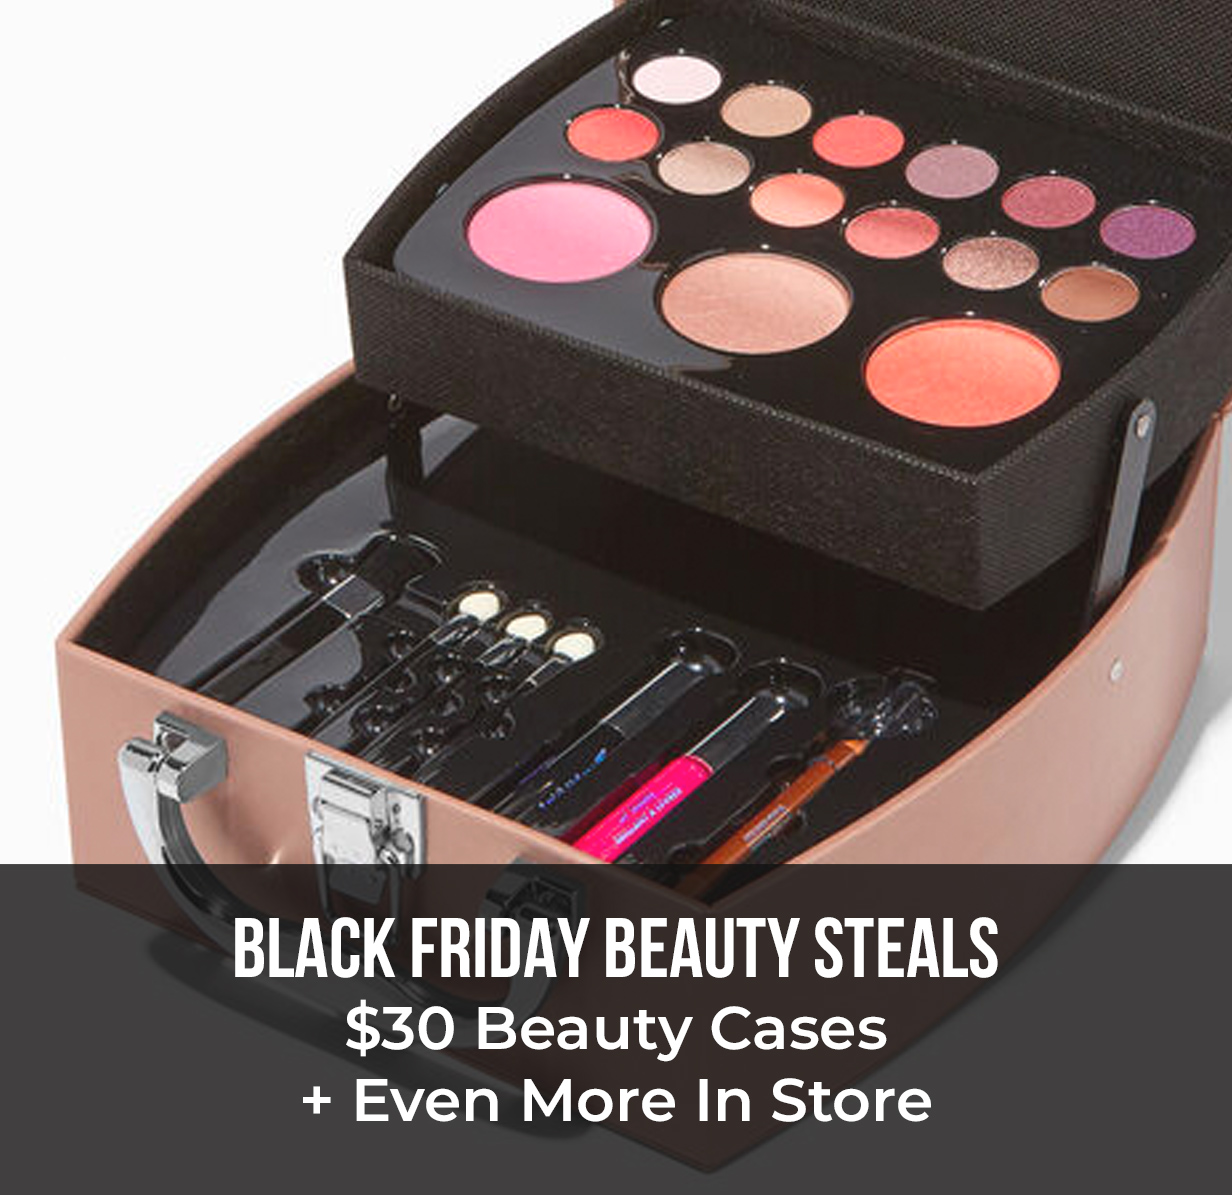 Black Friday Beauty Steals $30 Beauty Cases + Even More In Store